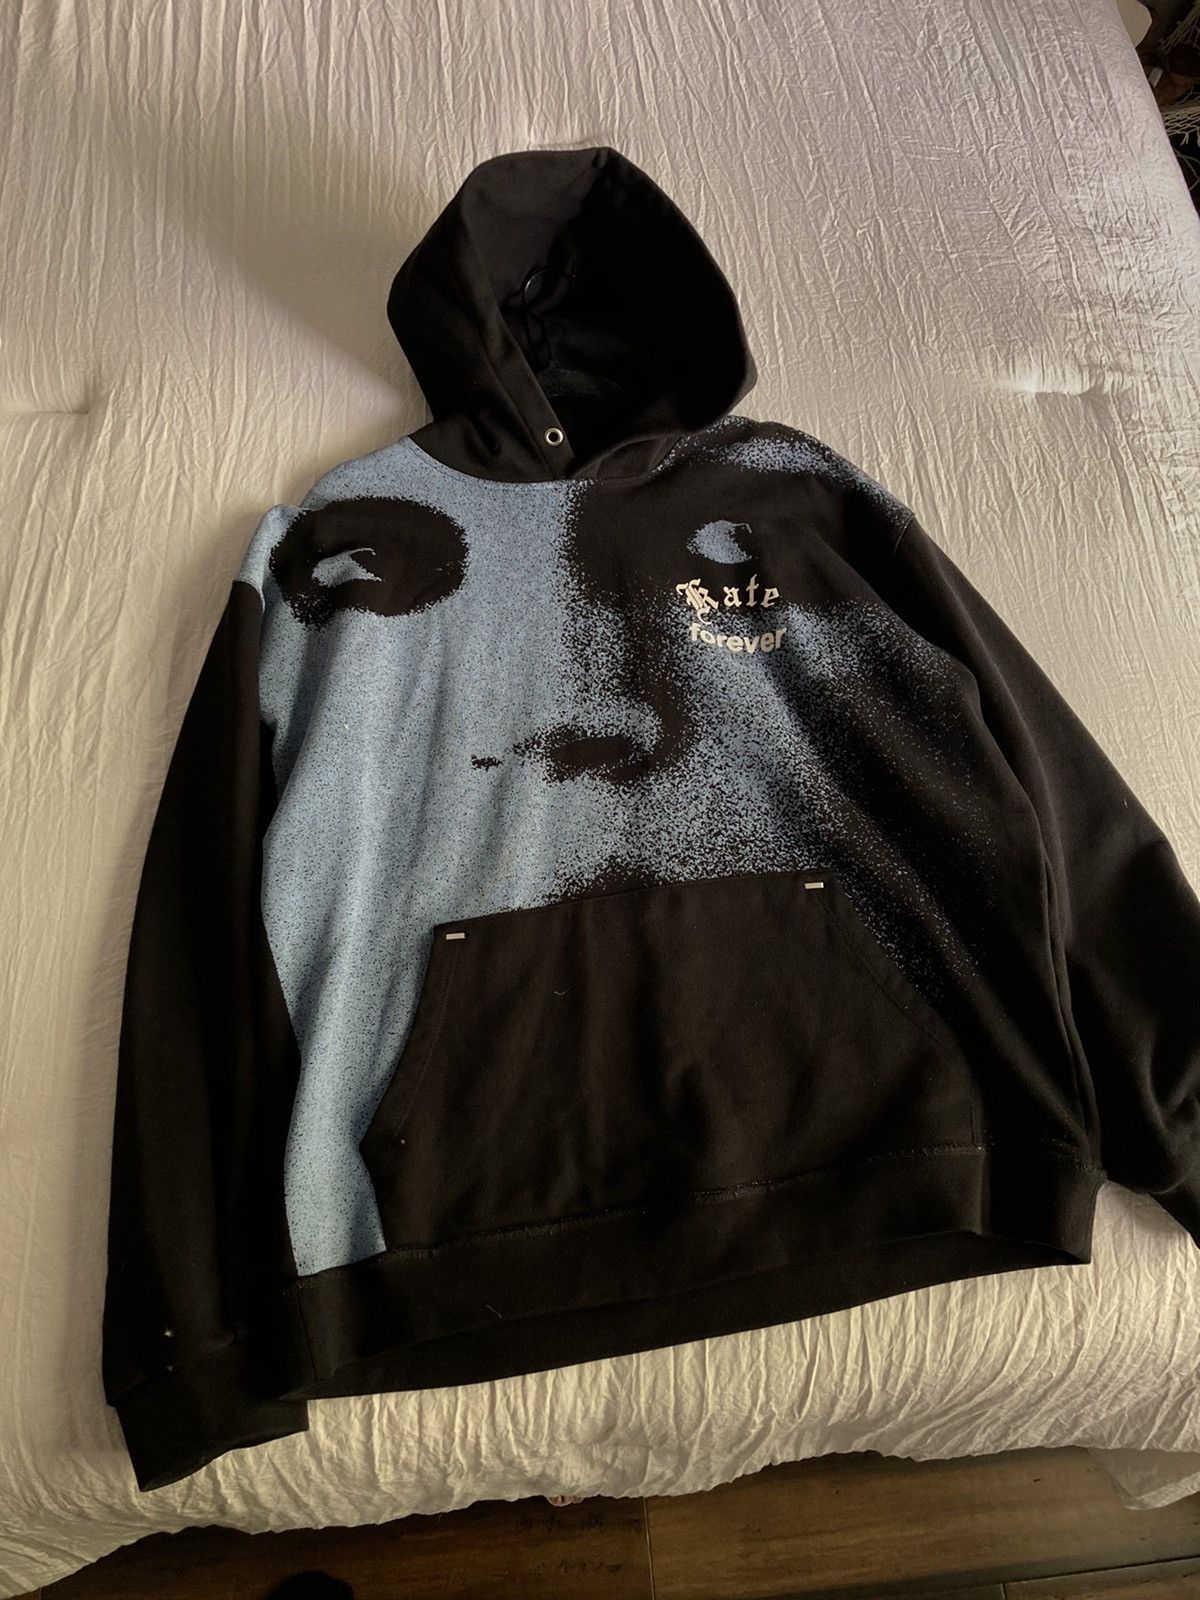 Mr. Completely Mr Completely x Kate Forever Hoodie | Grailed